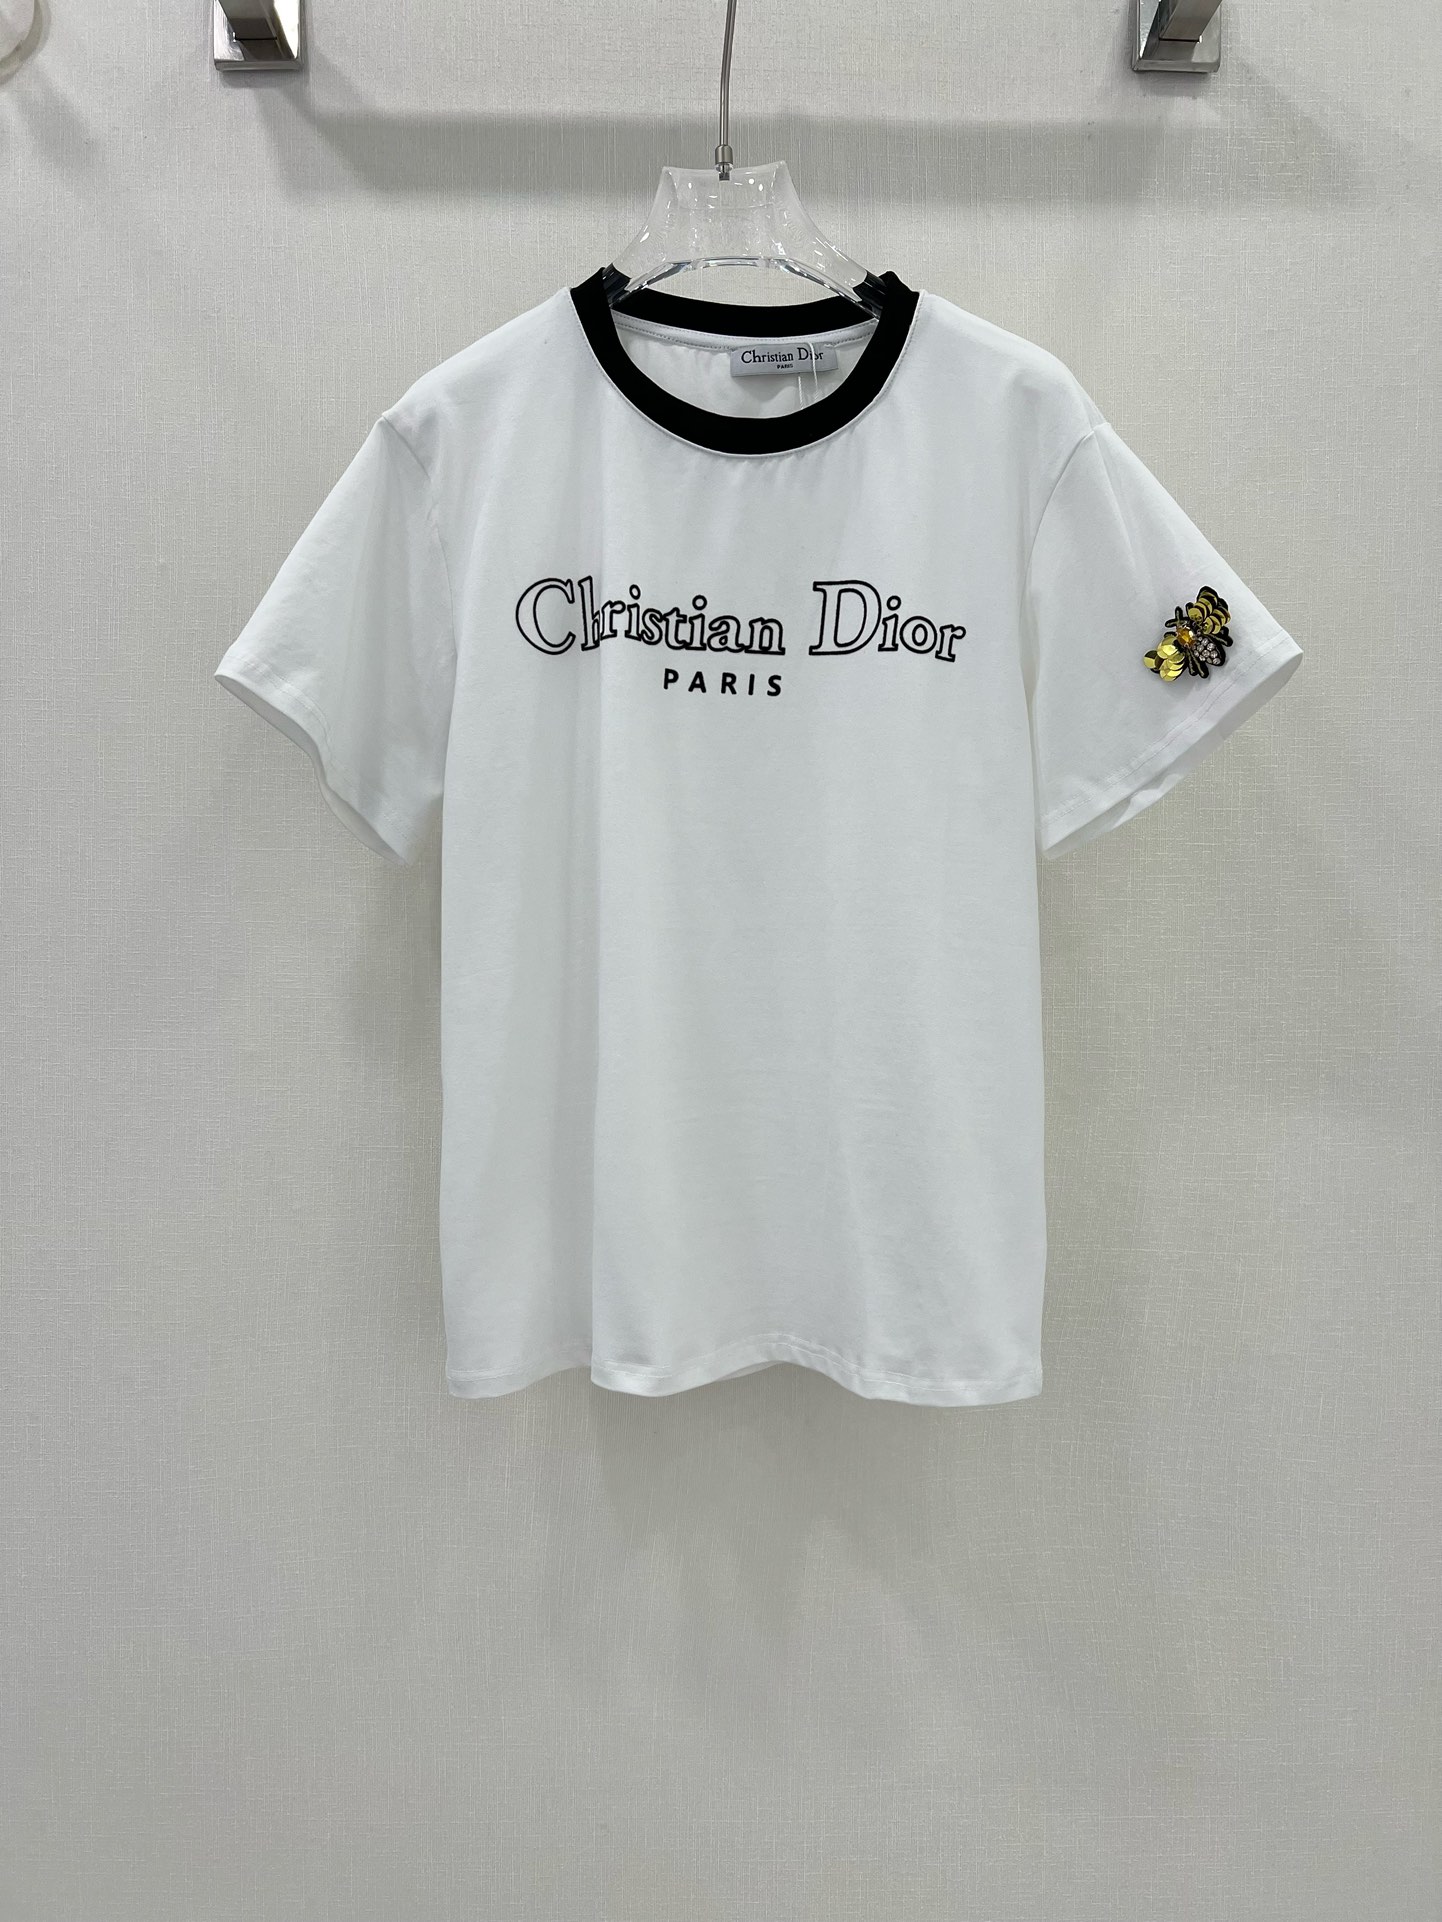 Dior Clothing T-Shirt Black White Embroidery Spring/Summer Collection Fashion Short Sleeve